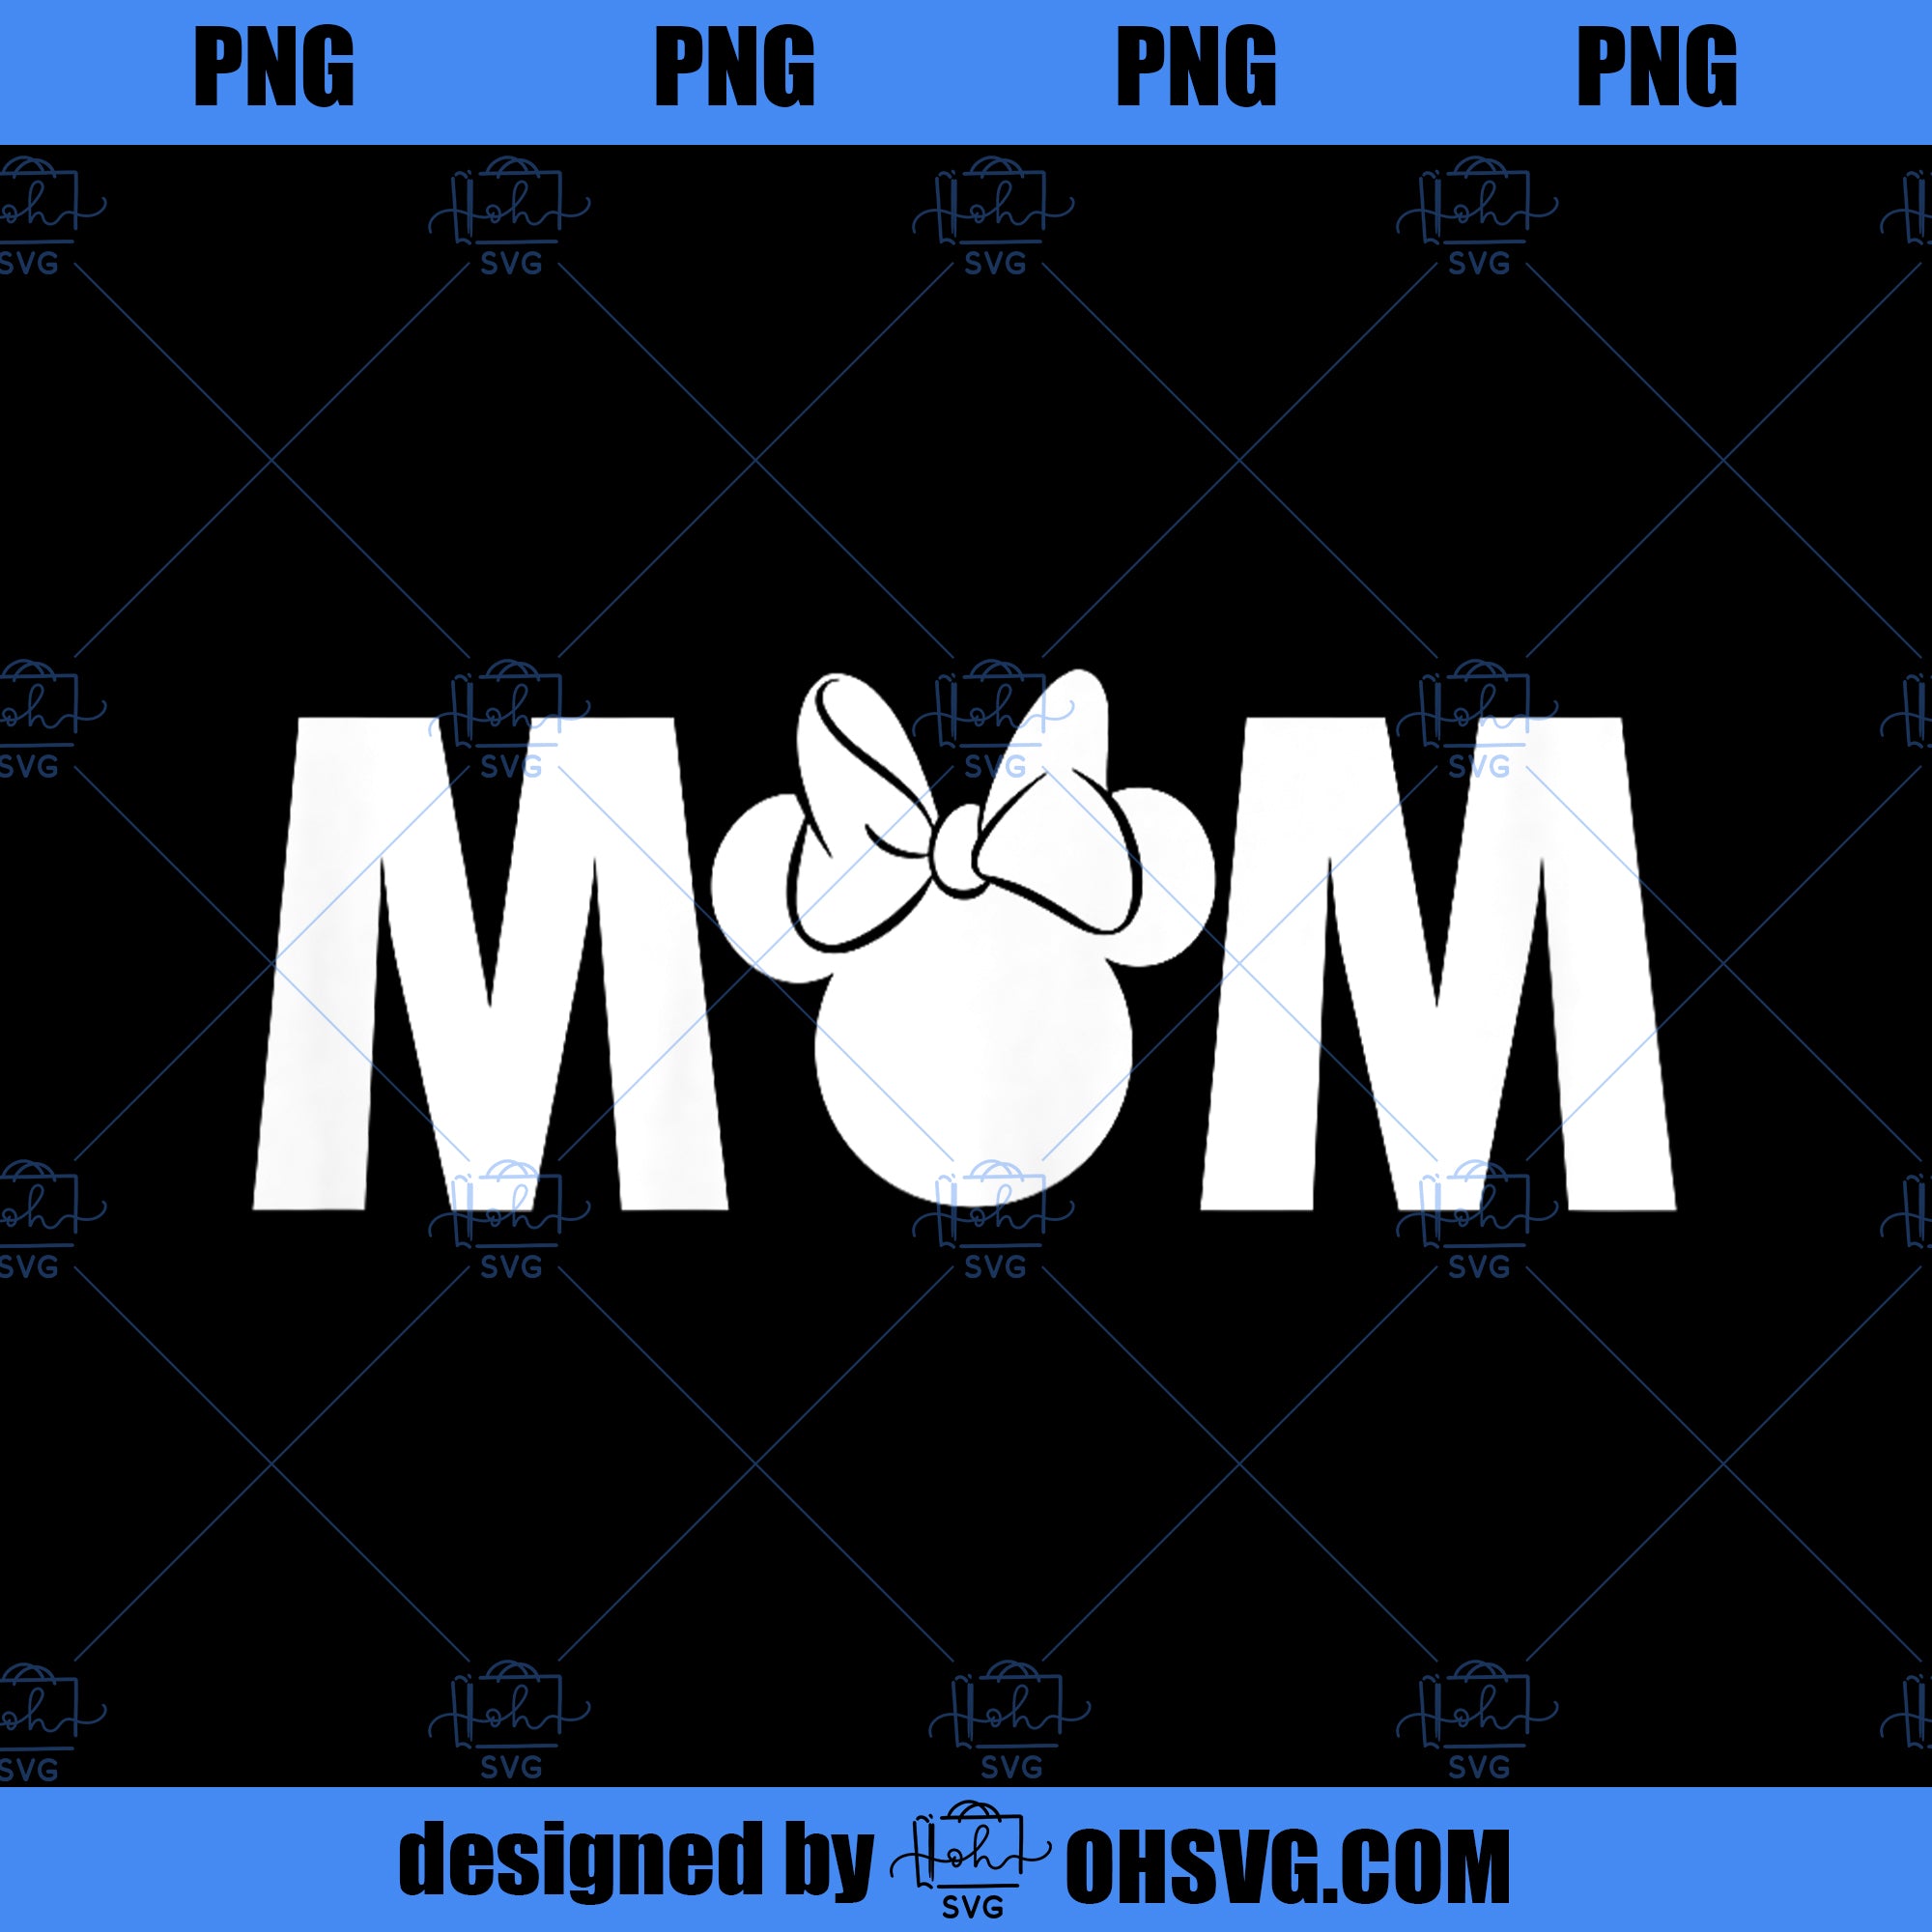 Disney Mickey And Friends Mothers Day Minnie Mom PNG, Disney PNG, Mickey Friends PNG